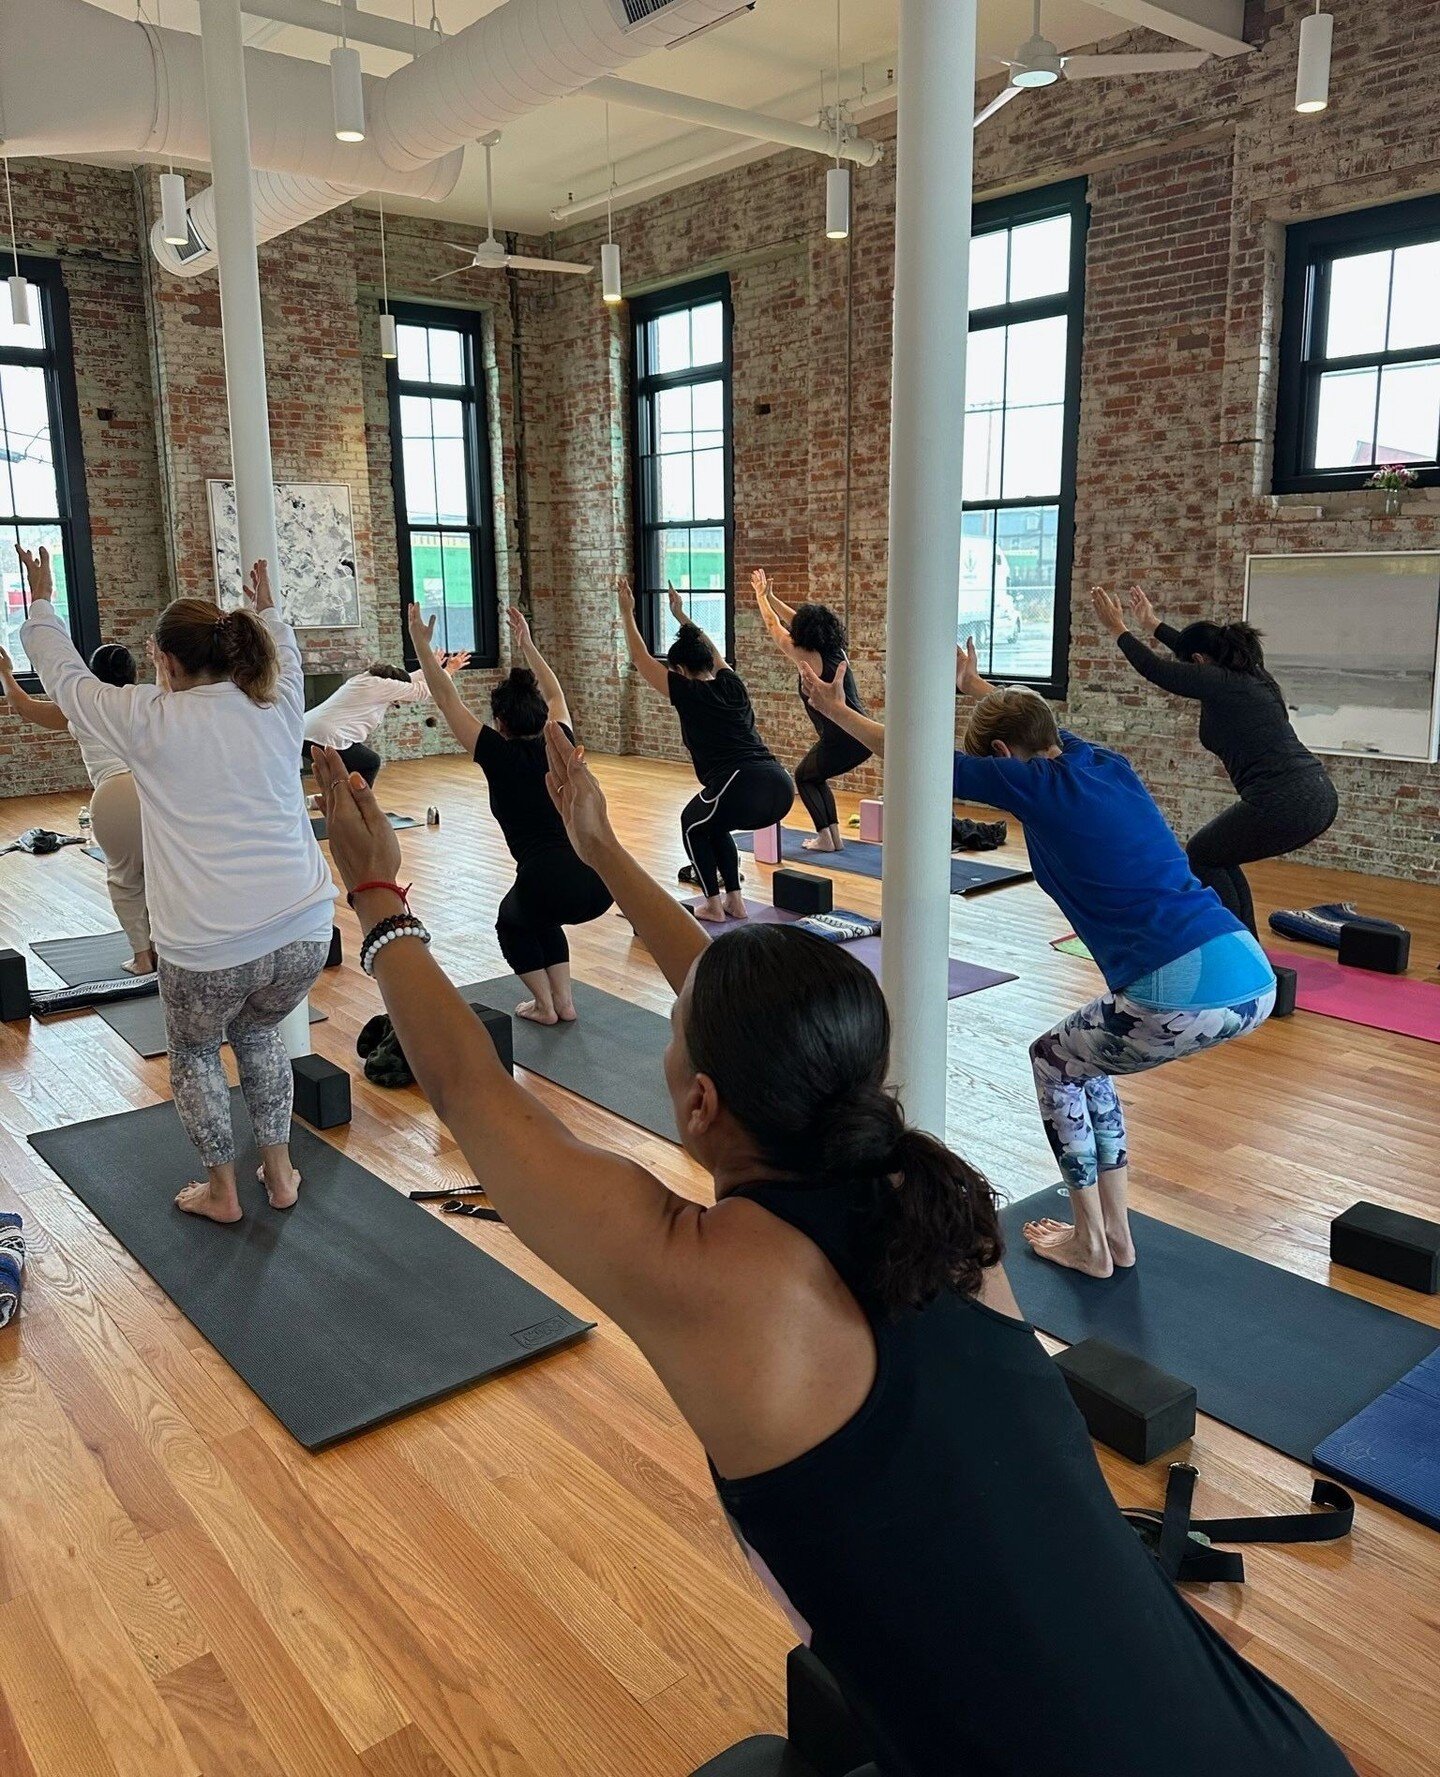 Strike a pose and feel the burn! Chair pose is here to strengthen your body and open your heart. ⁠
⁠
Join our inclusive yoga community with low-cost classes and experience the unique approach to wellness that has earned us recognition and awards. ⁠
⁠